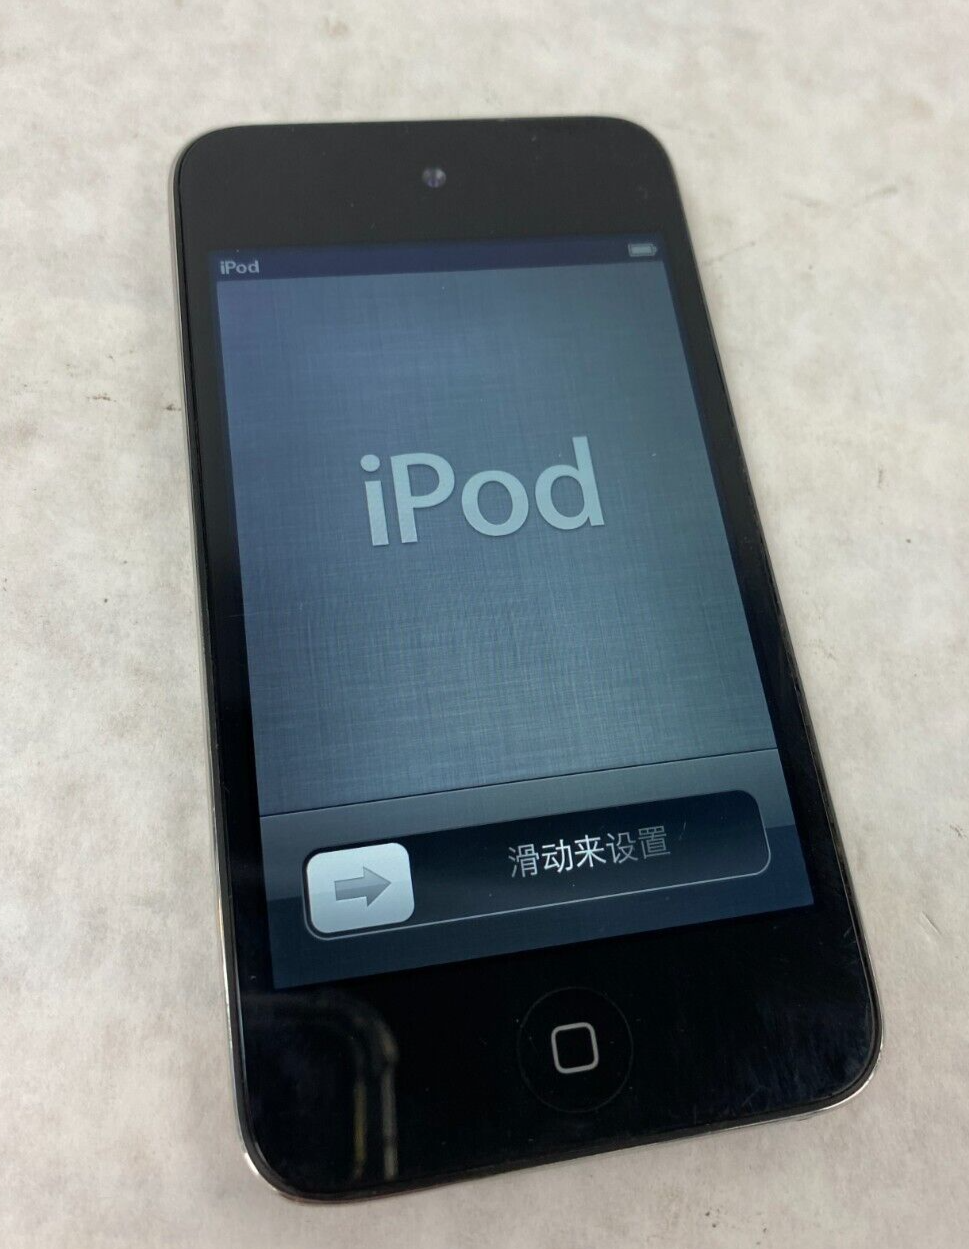 Apple iPod Touch 4th Generation Black 8GB A1367